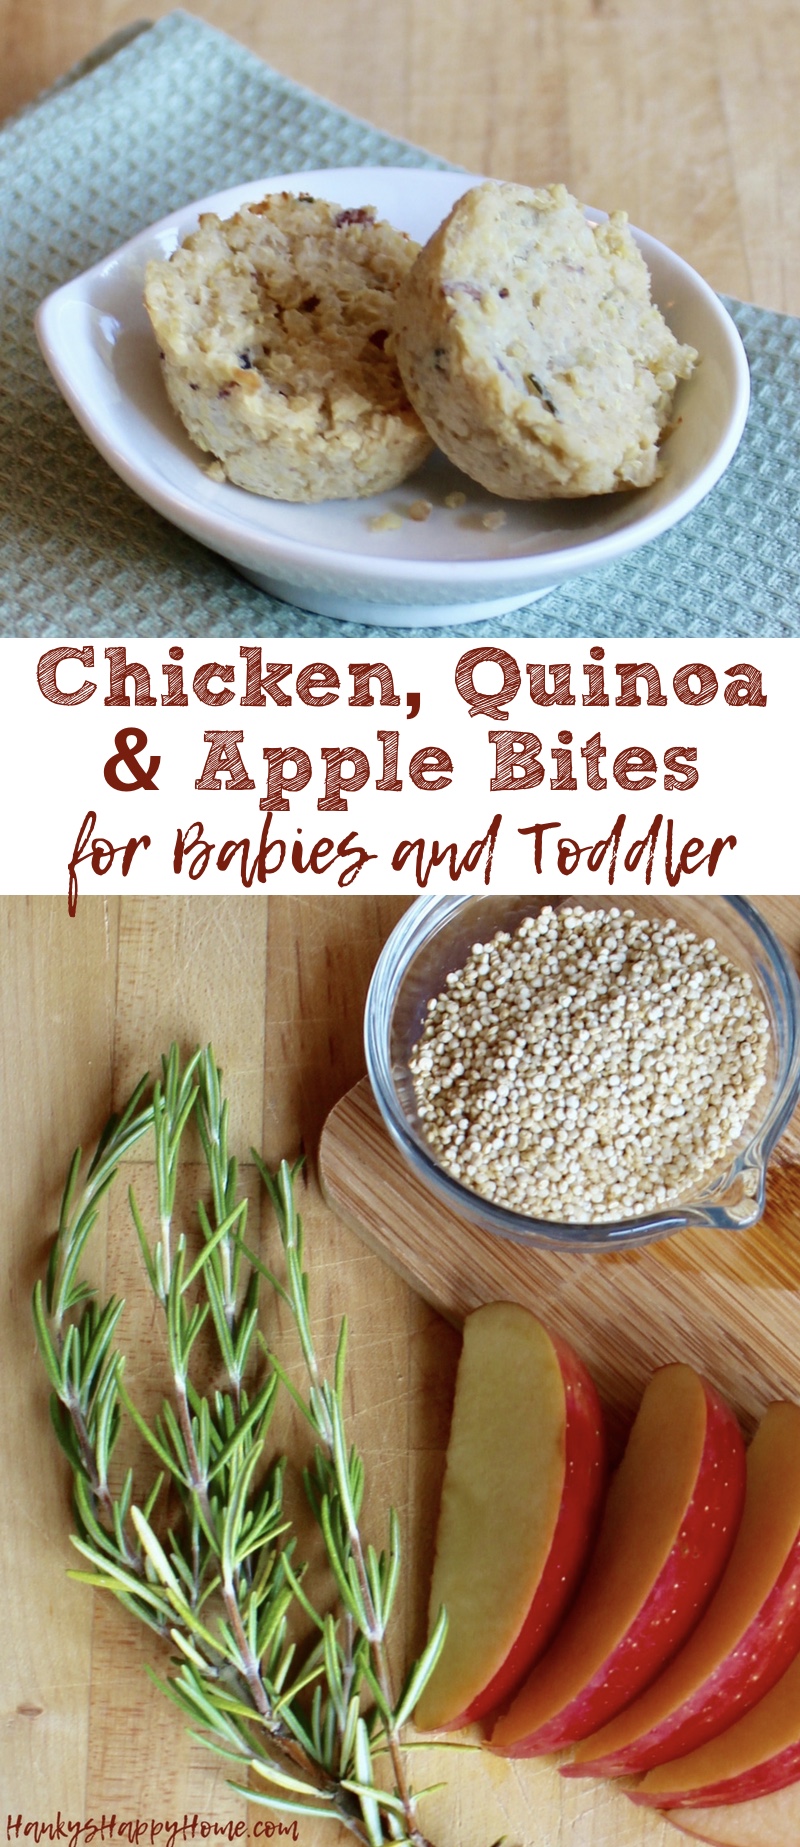 These Chicken, Quinoa & Apple Bites are a delicious combination of protein and fruit that make a great meal or snack for baby.